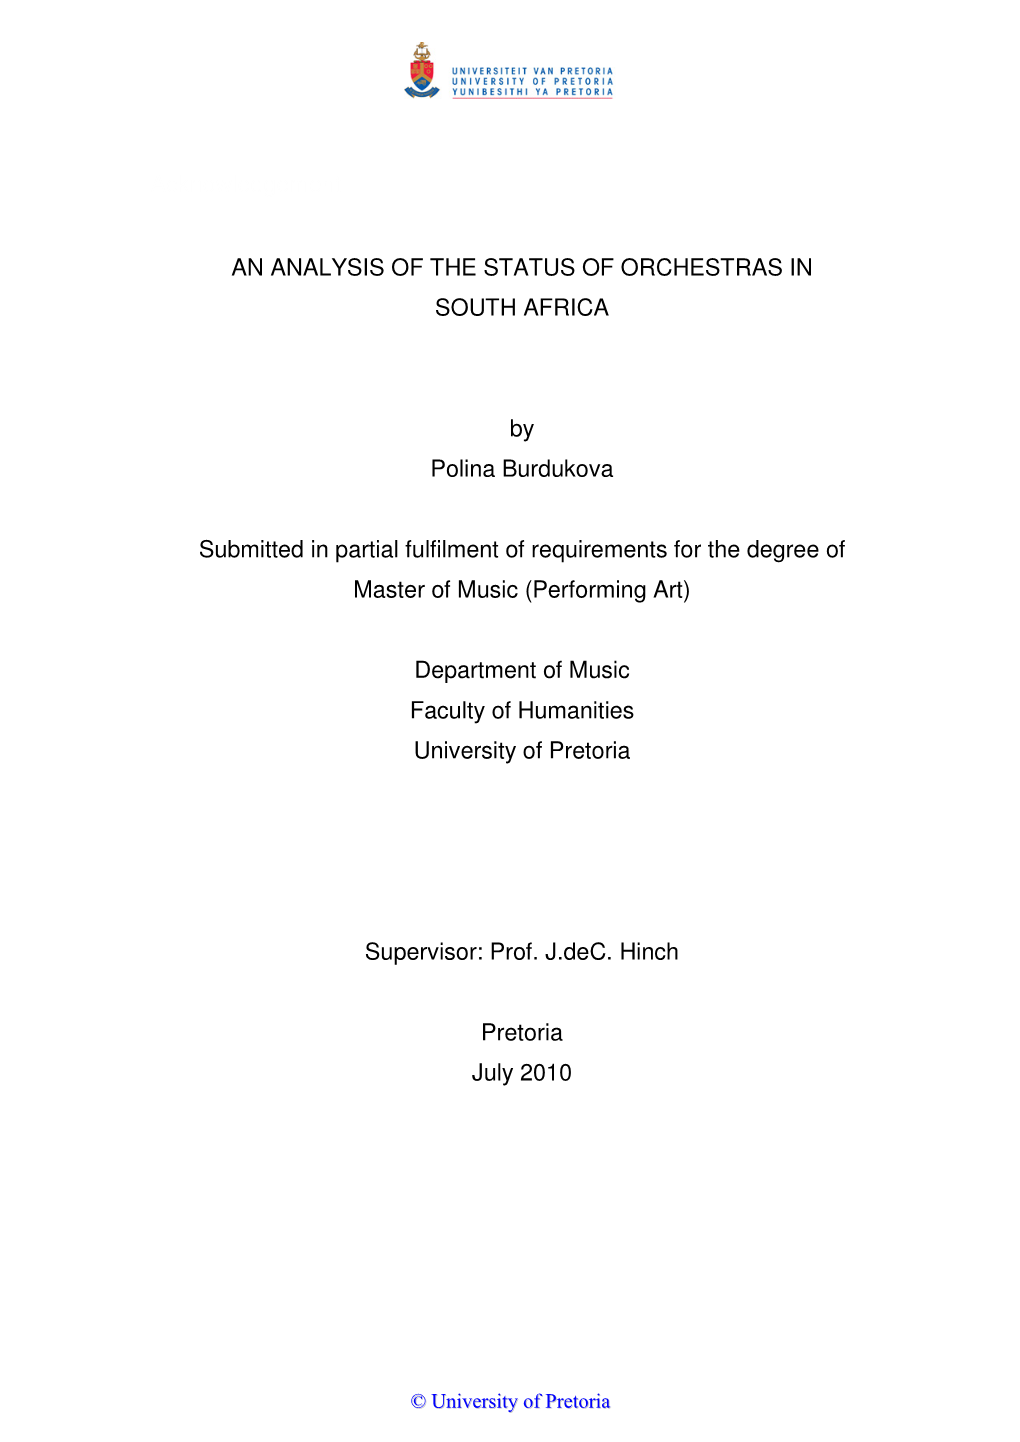 Acknowledgement an ANALYSIS of the STATUS of ORCHESTRAS in SOUTH AFRICA by Polina Burdukova Submitted in Partial Fulfilment Of